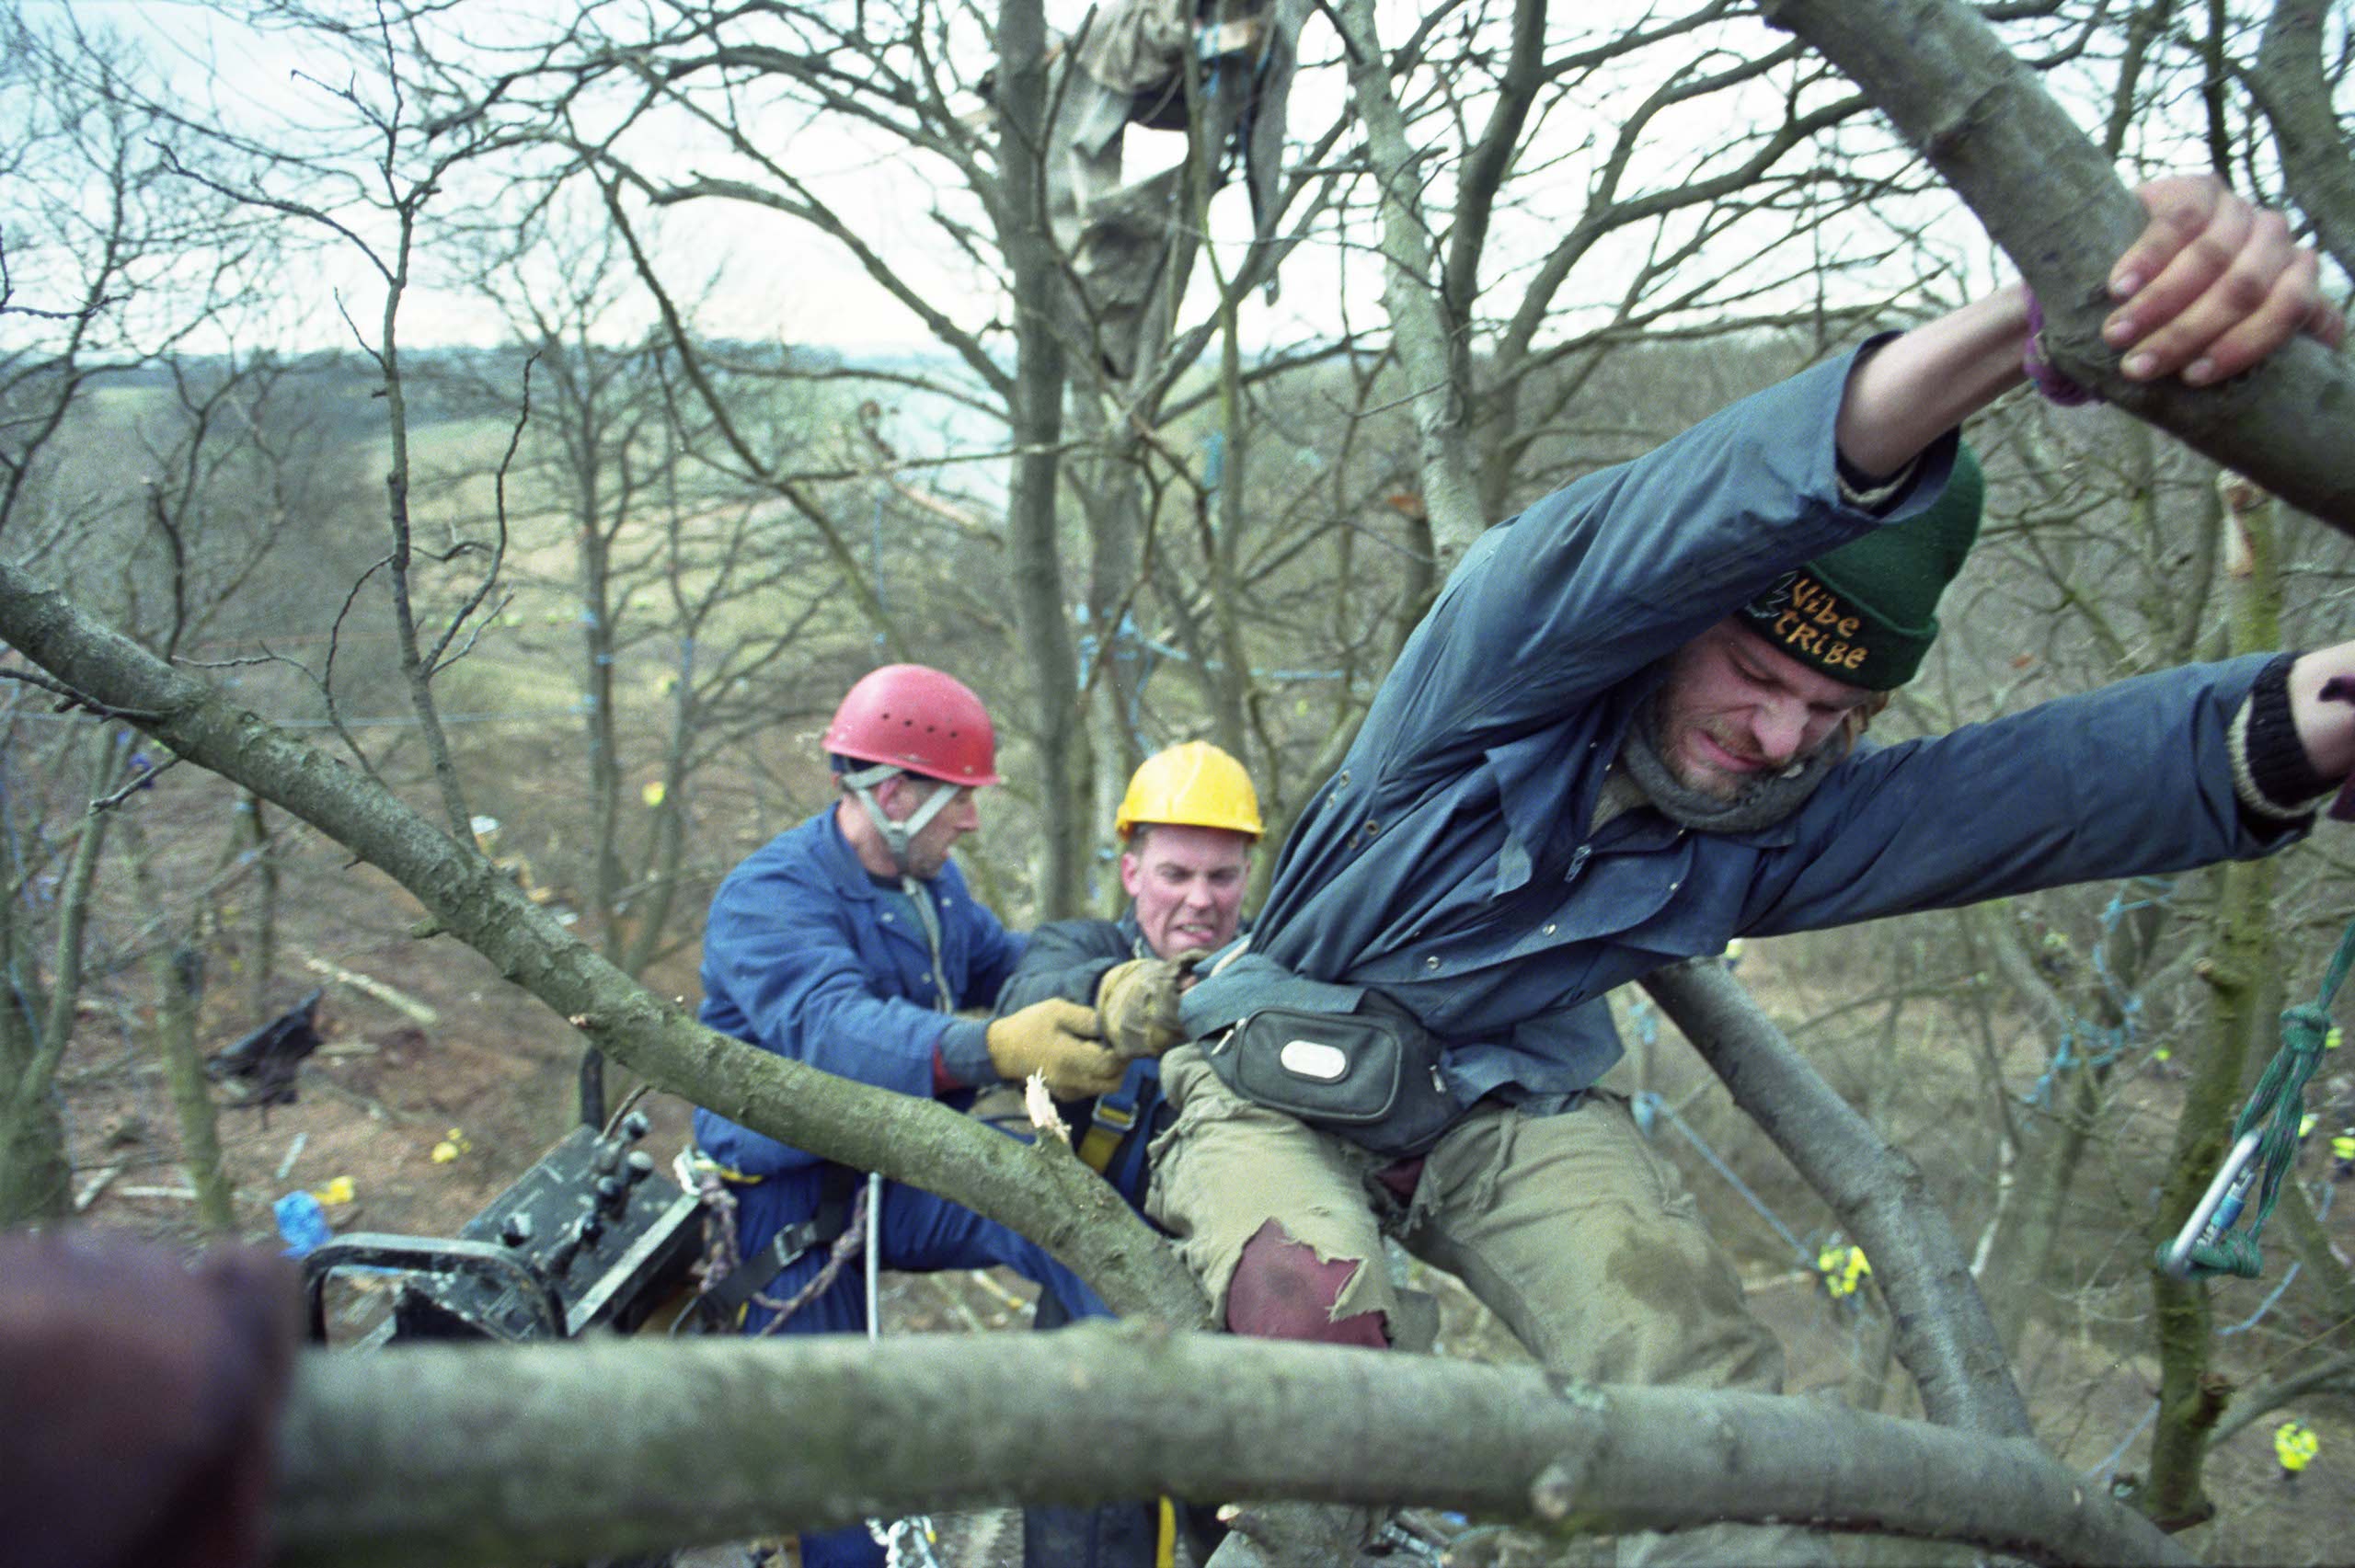 Two men in hard hats pull at a man resisting by holding onto a tree branch